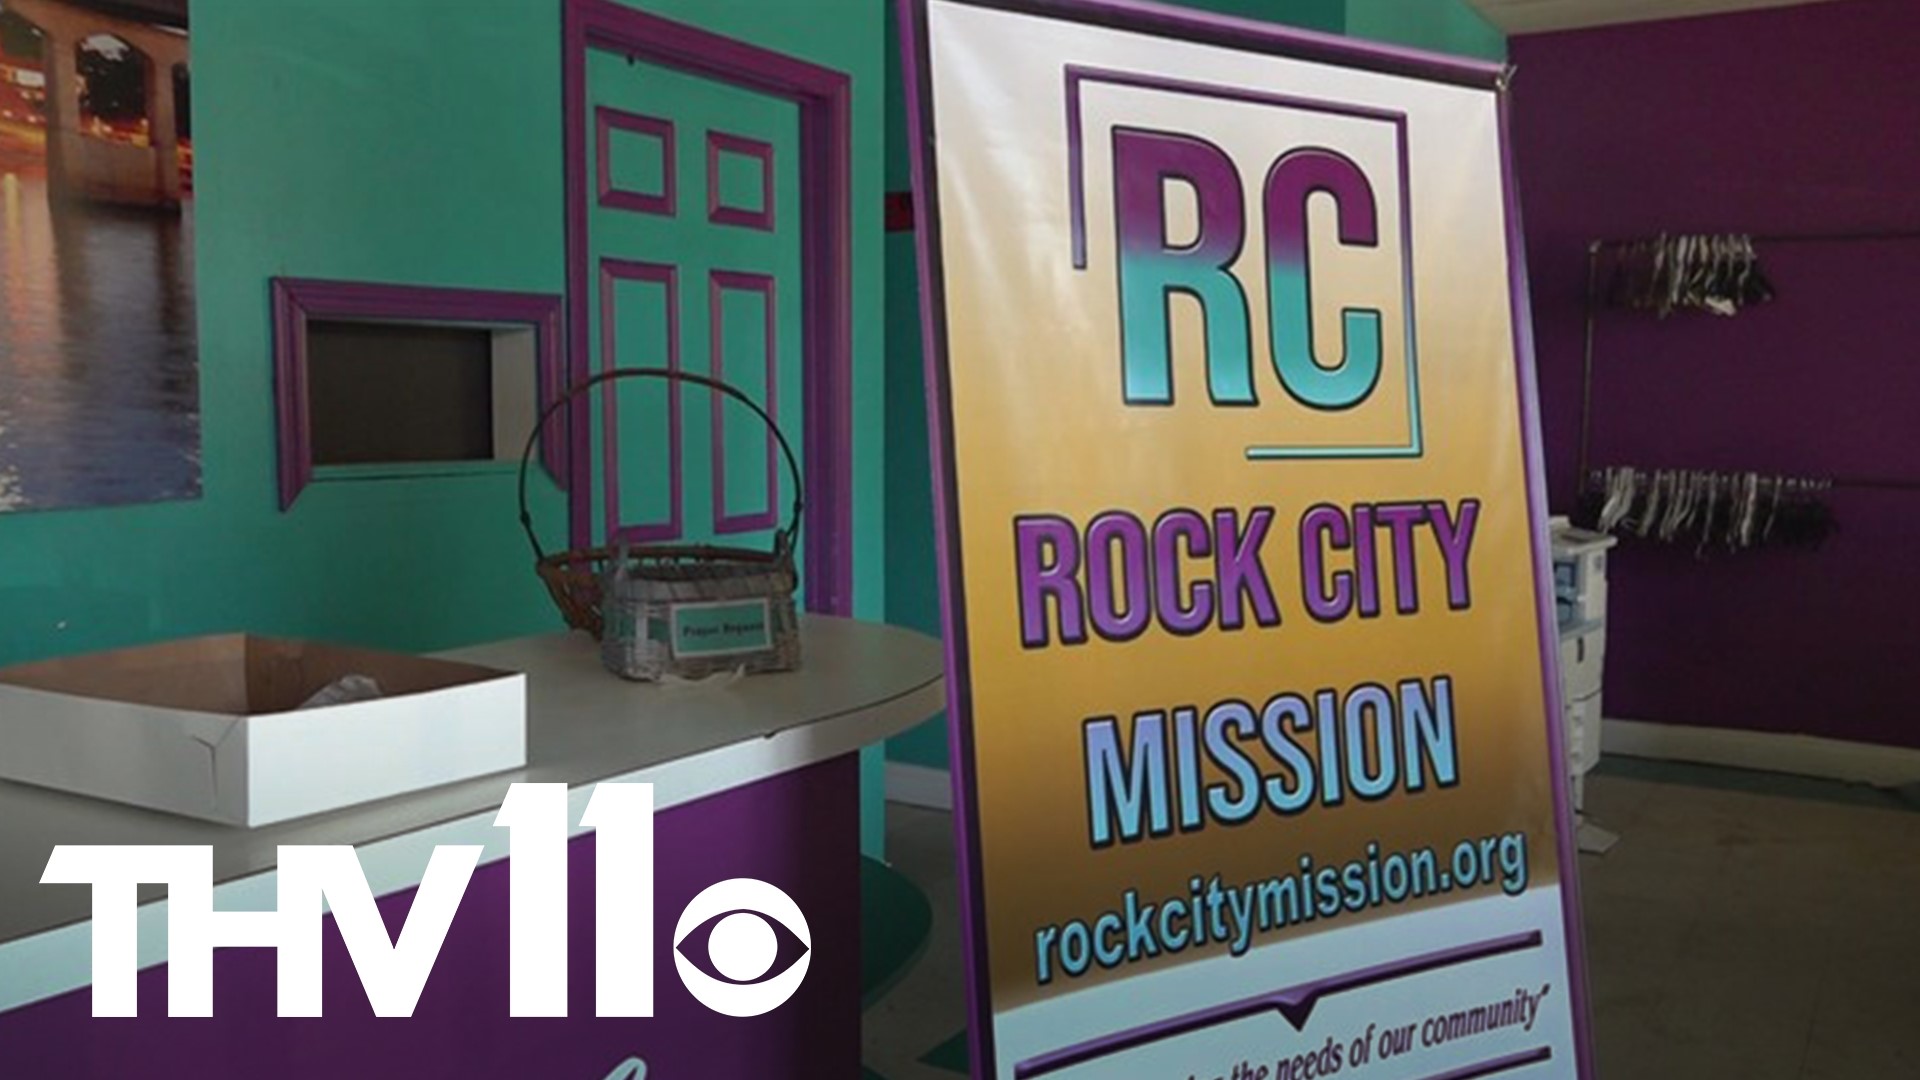 Rock City Mission has been helping people in southwest Little Rock for nearly 30 years. Sadly, the ministry now desperately needs some help themselves.